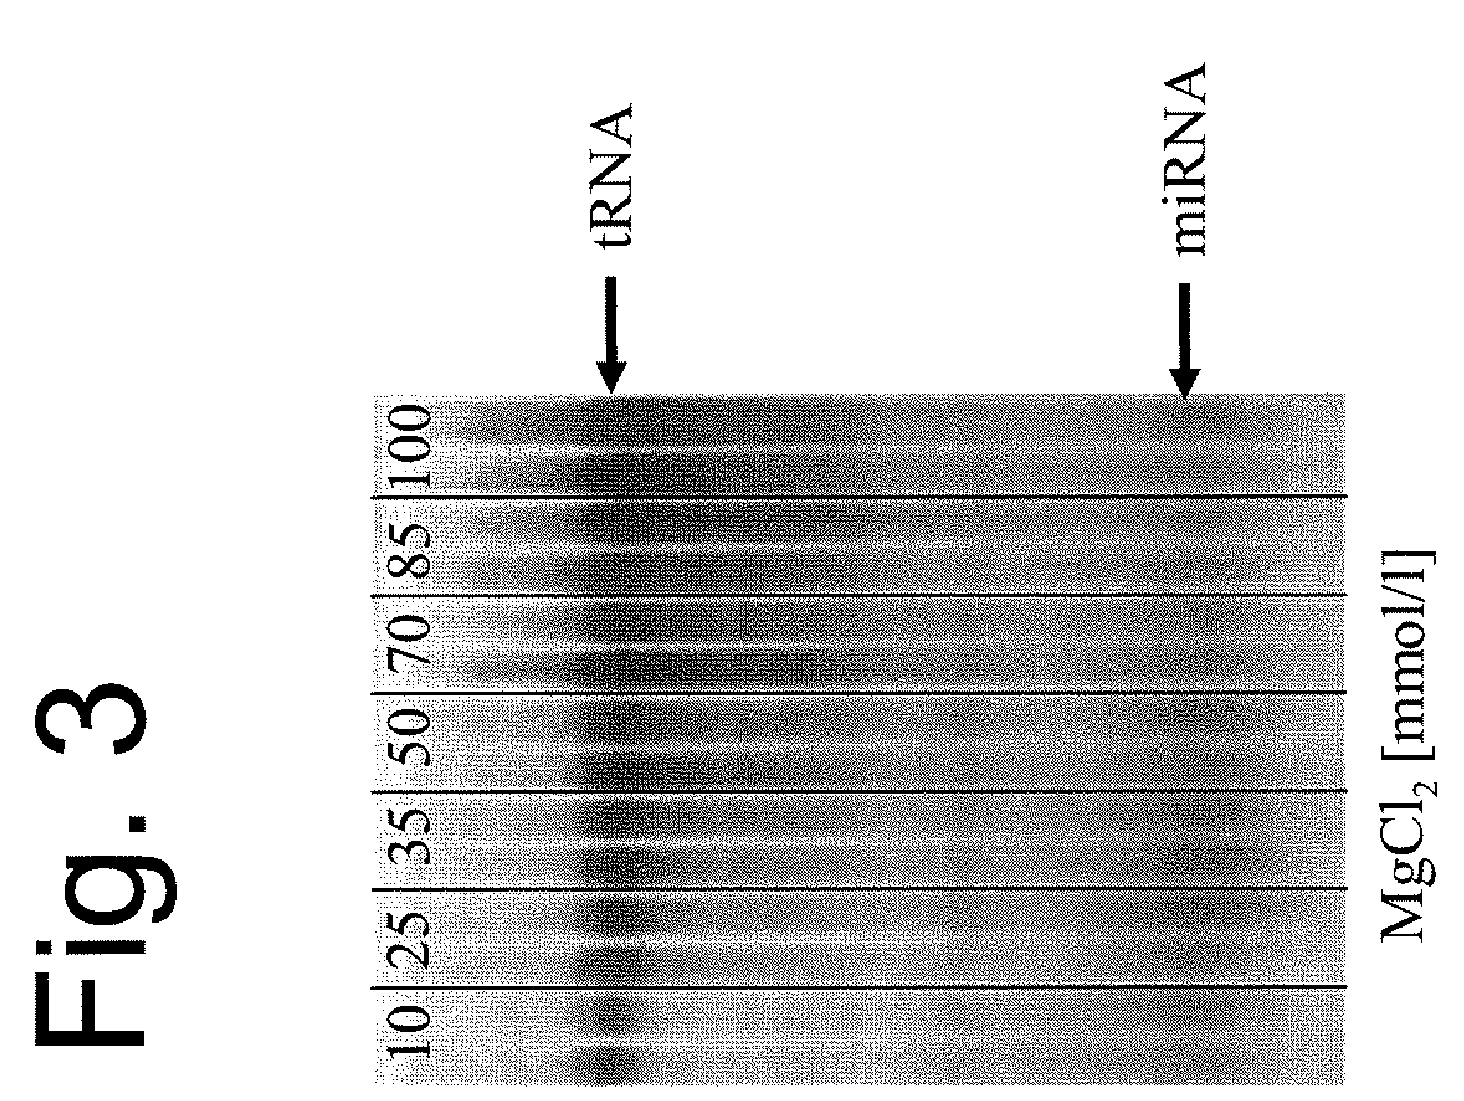 Method for enriching short-chain nucleic acids